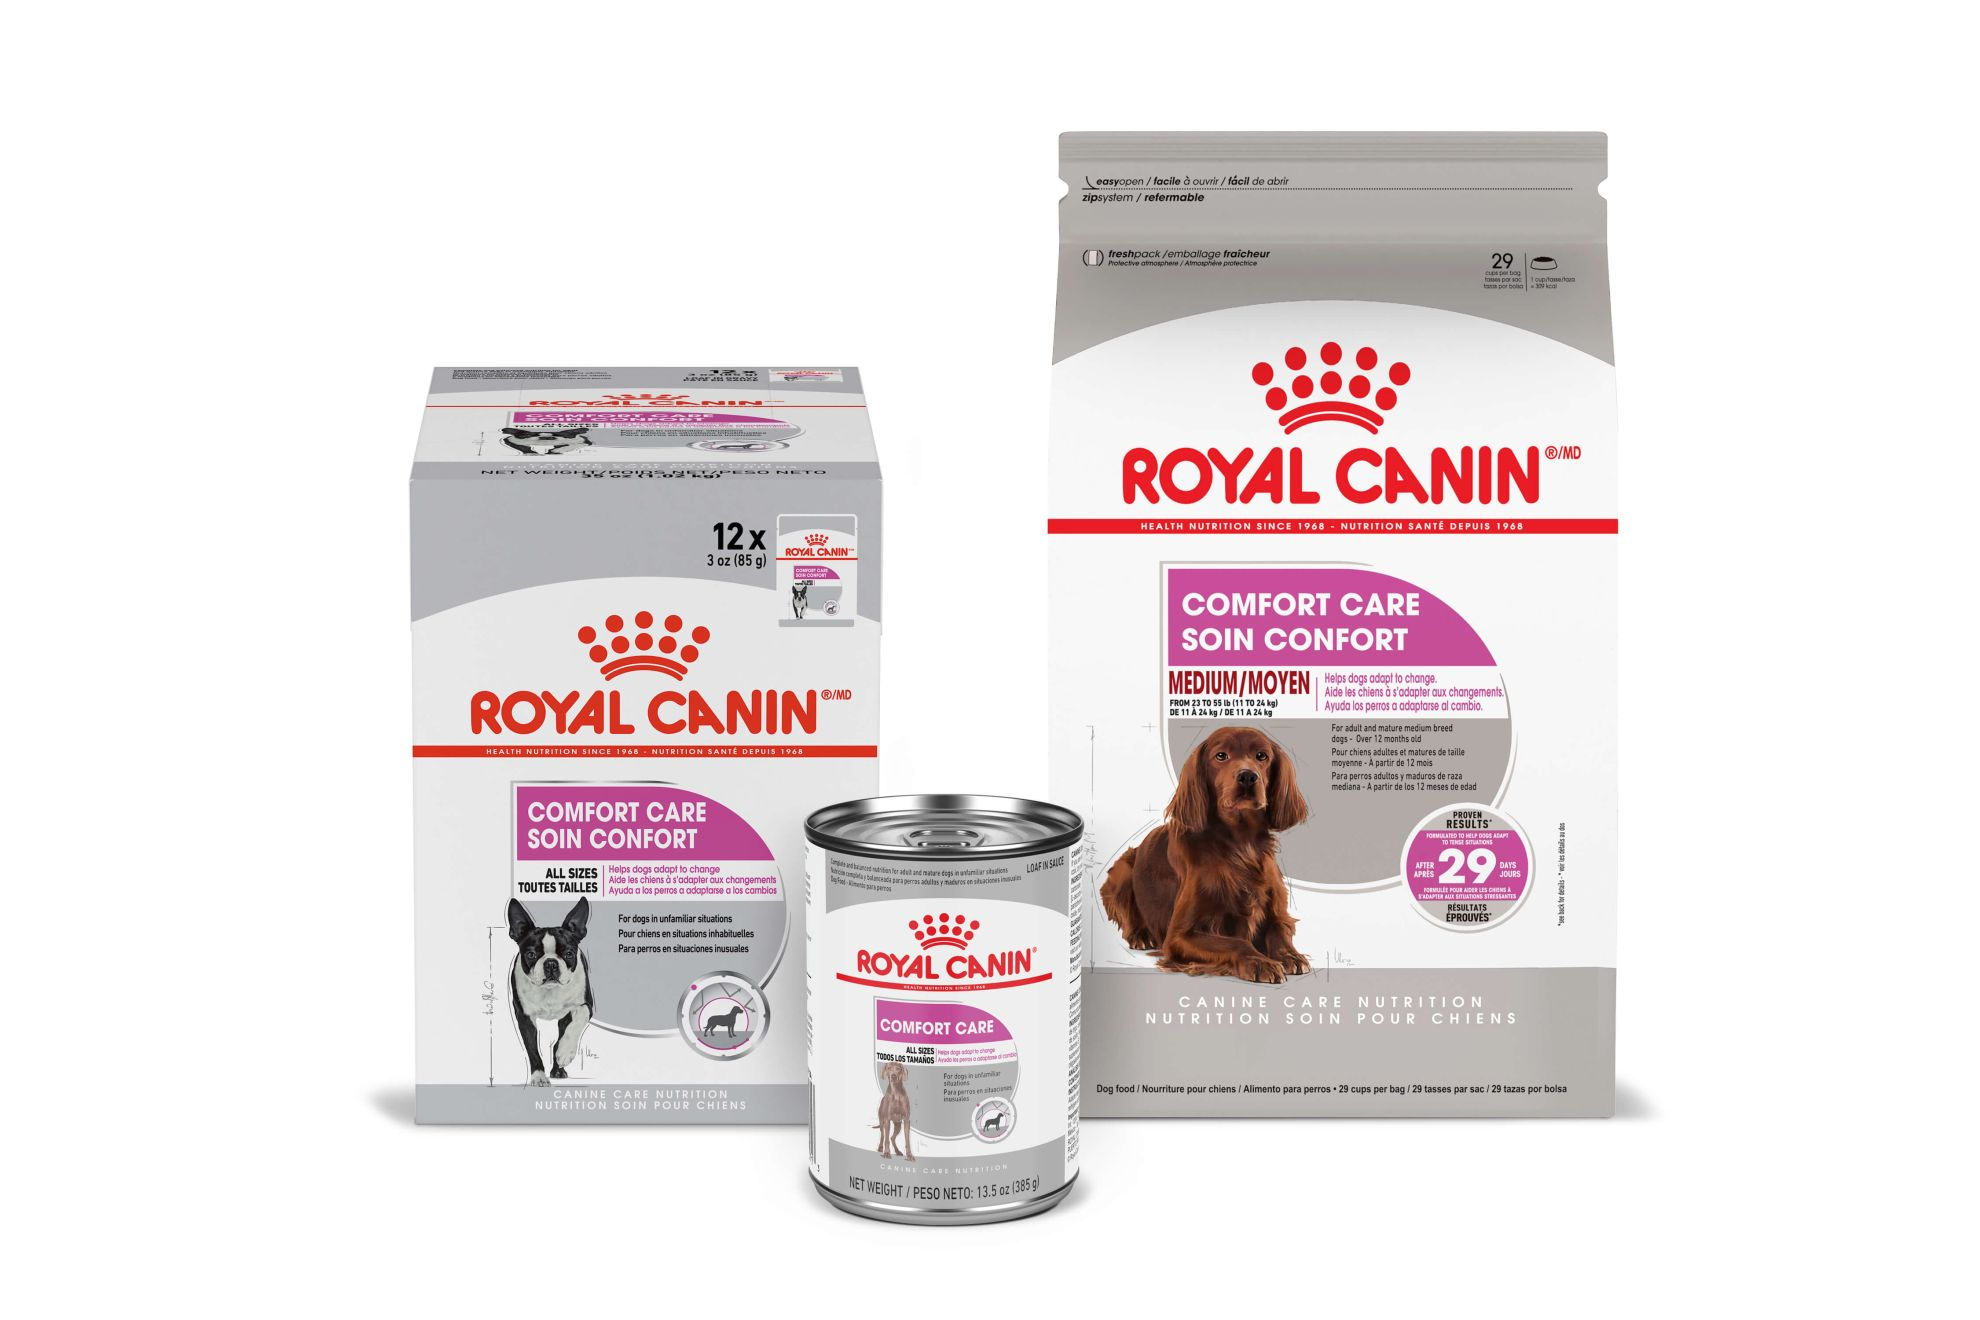 Royal Canin Coat Care Range of Products